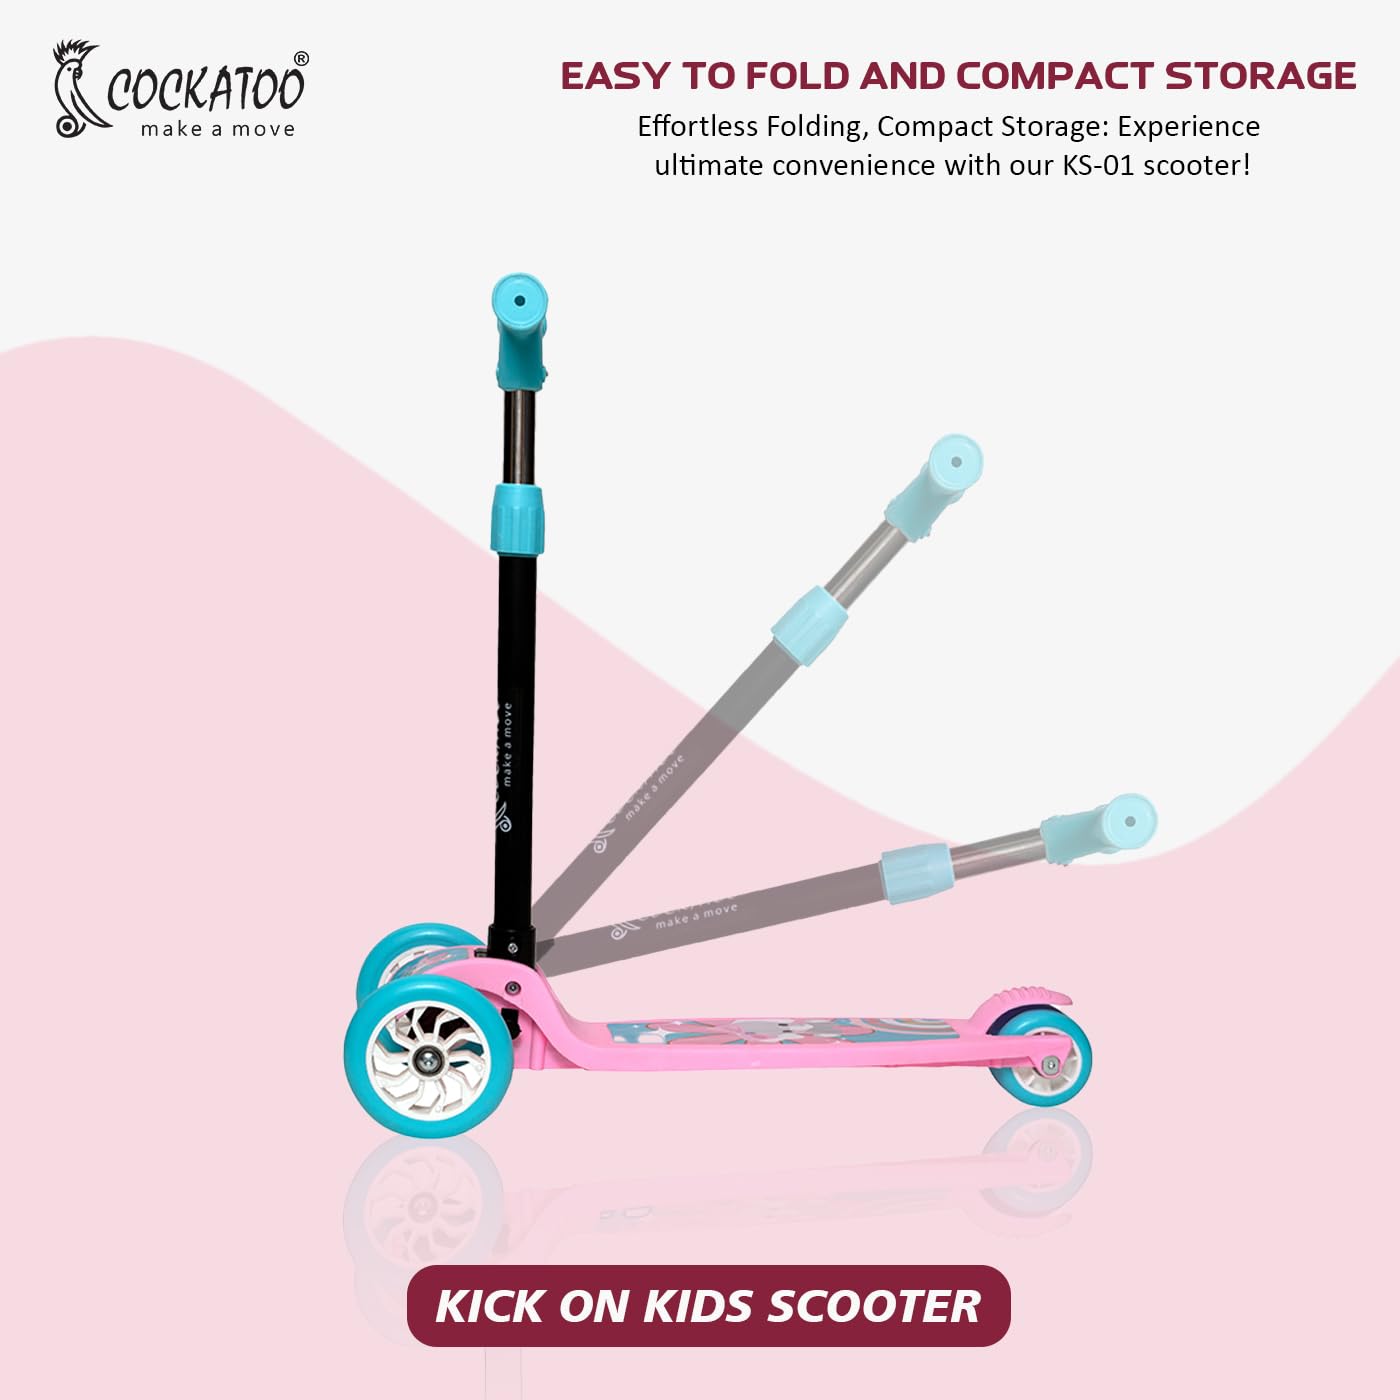 Cockatoo Rat&Cat Series Kick Scooter 3 to 10 Years Boys & Girls, Kick Scooter with PVC Wheels & Rare Brakes